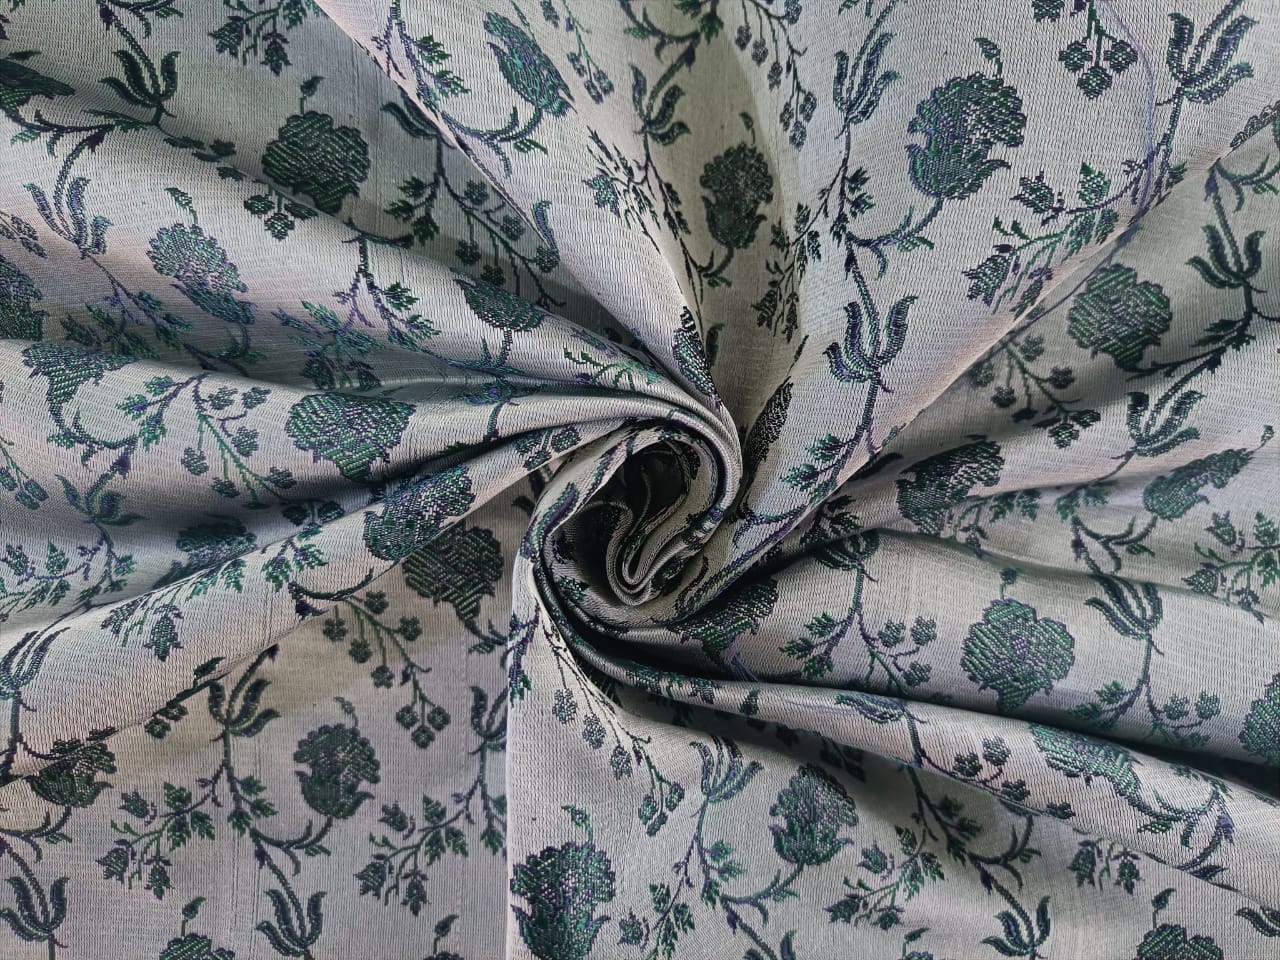 Silk Brocade fabric silver grey with blue green floral jacquard 44" wide BRO160[2]